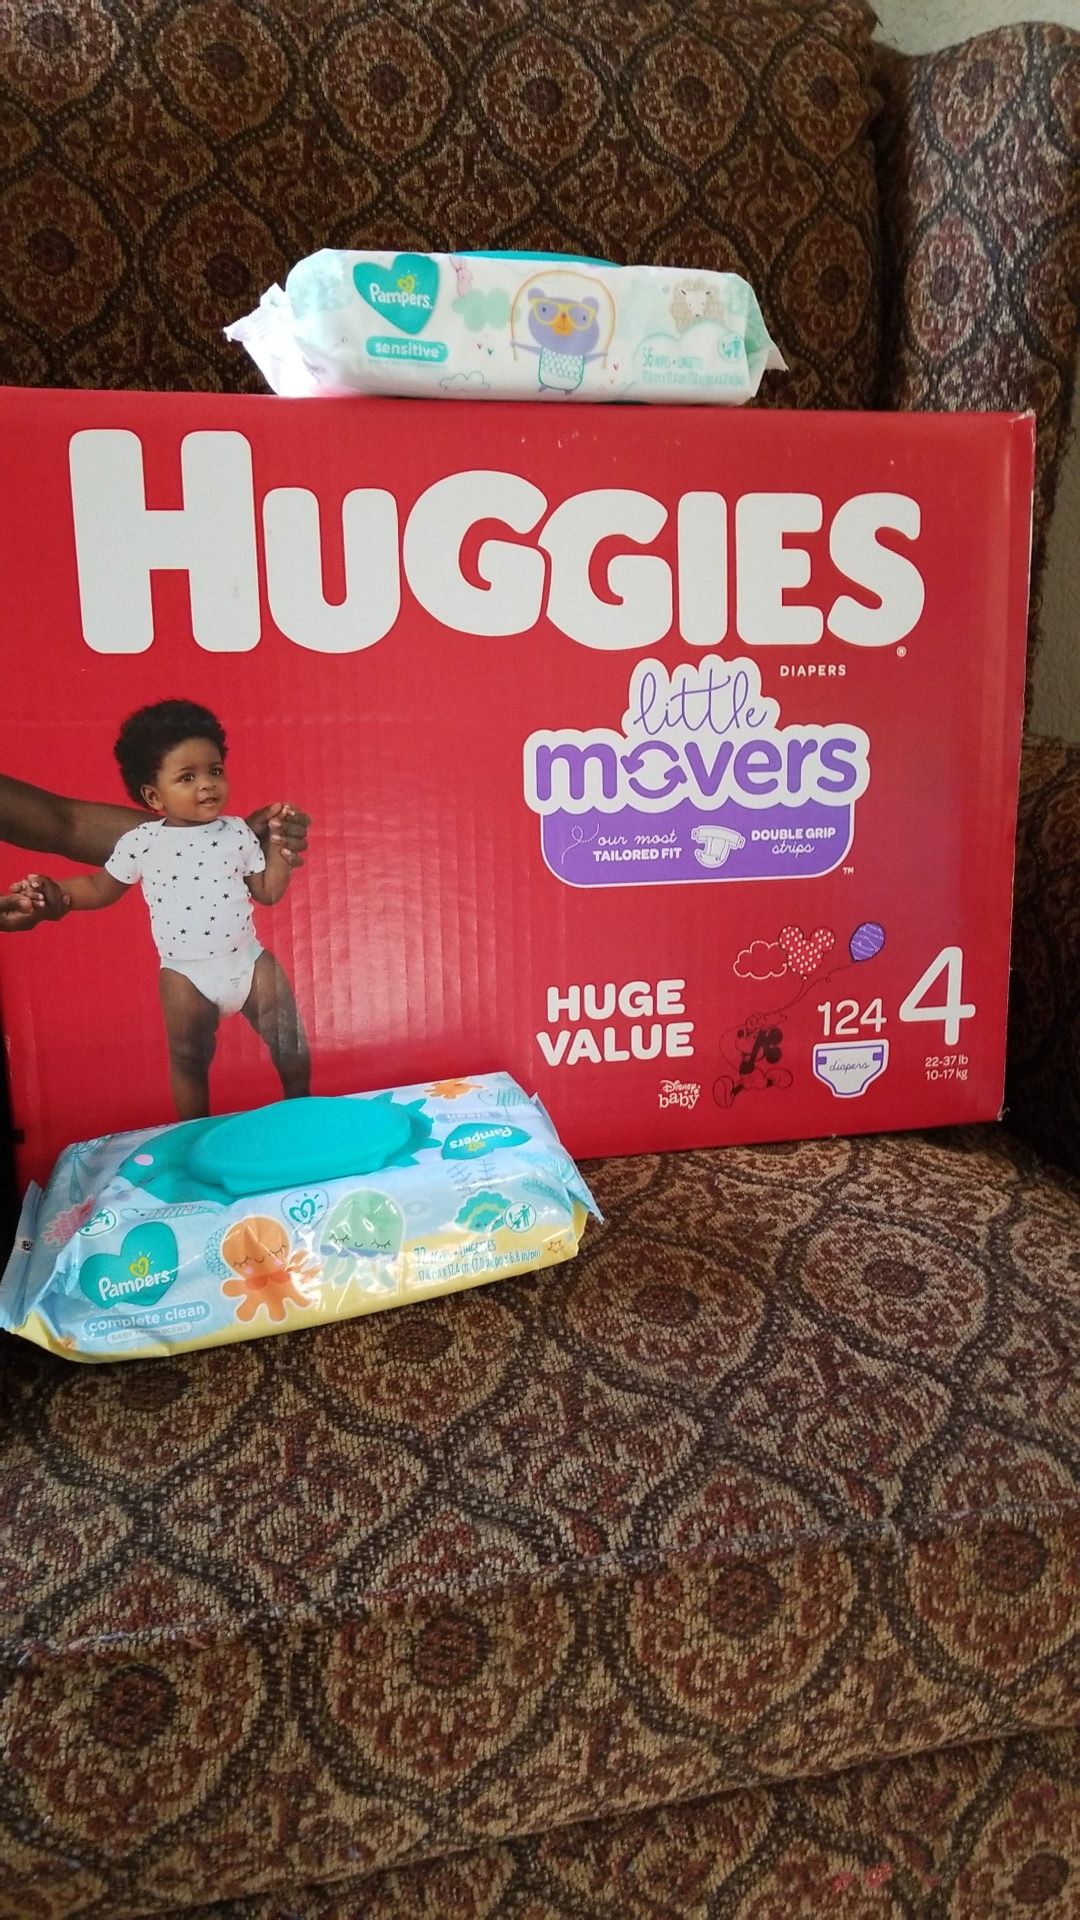 Huggies Diapers Little Movers